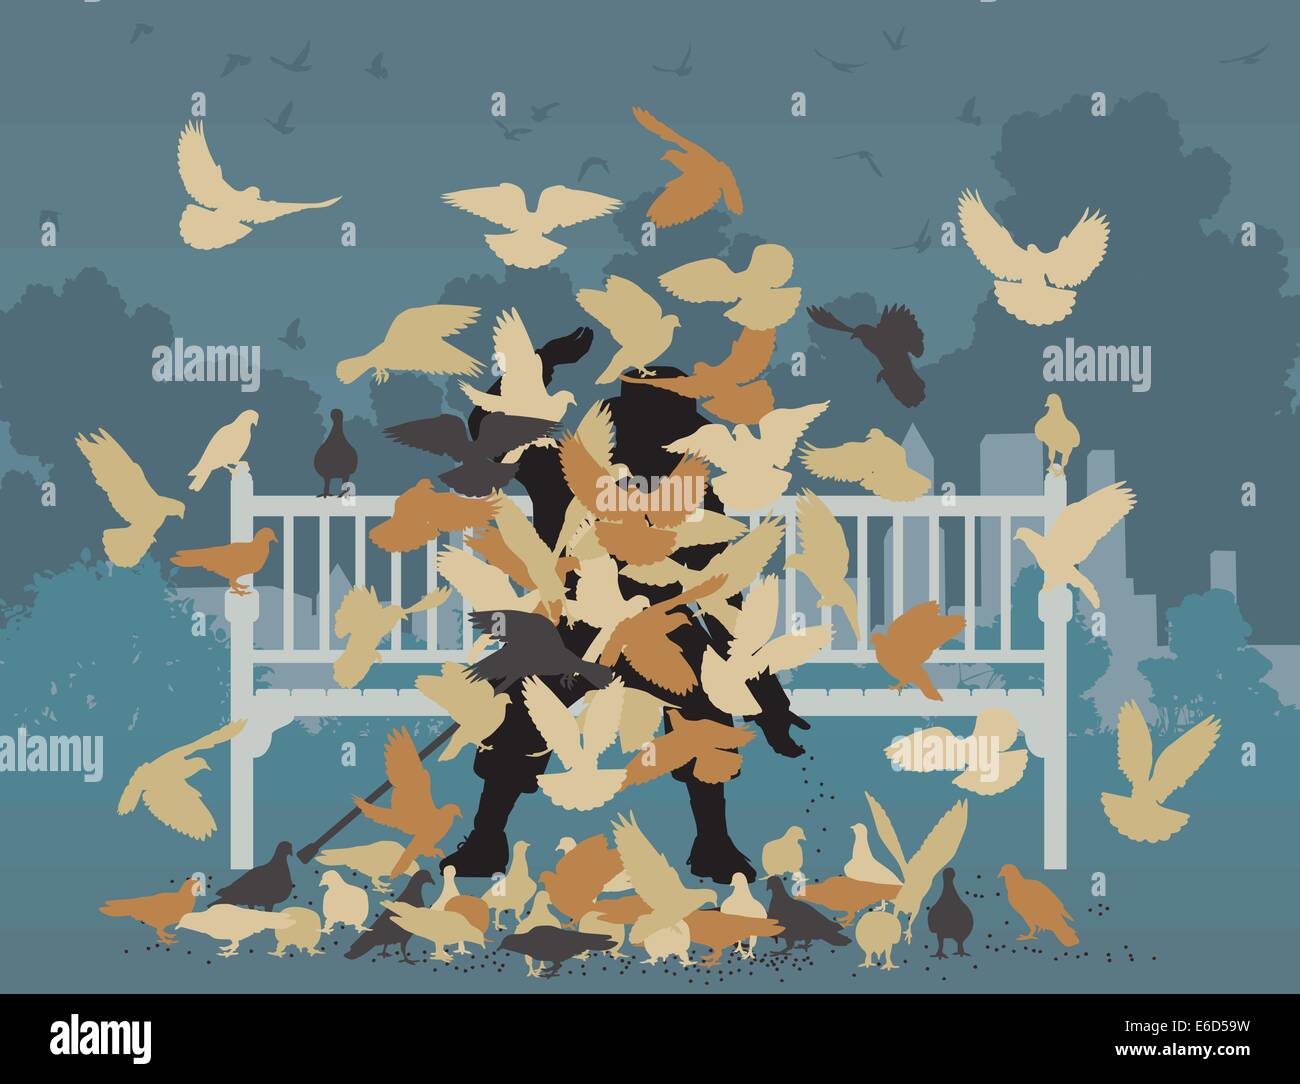 Editable vector illustration of a man on a park bench smothered by pigeons Stock Vector